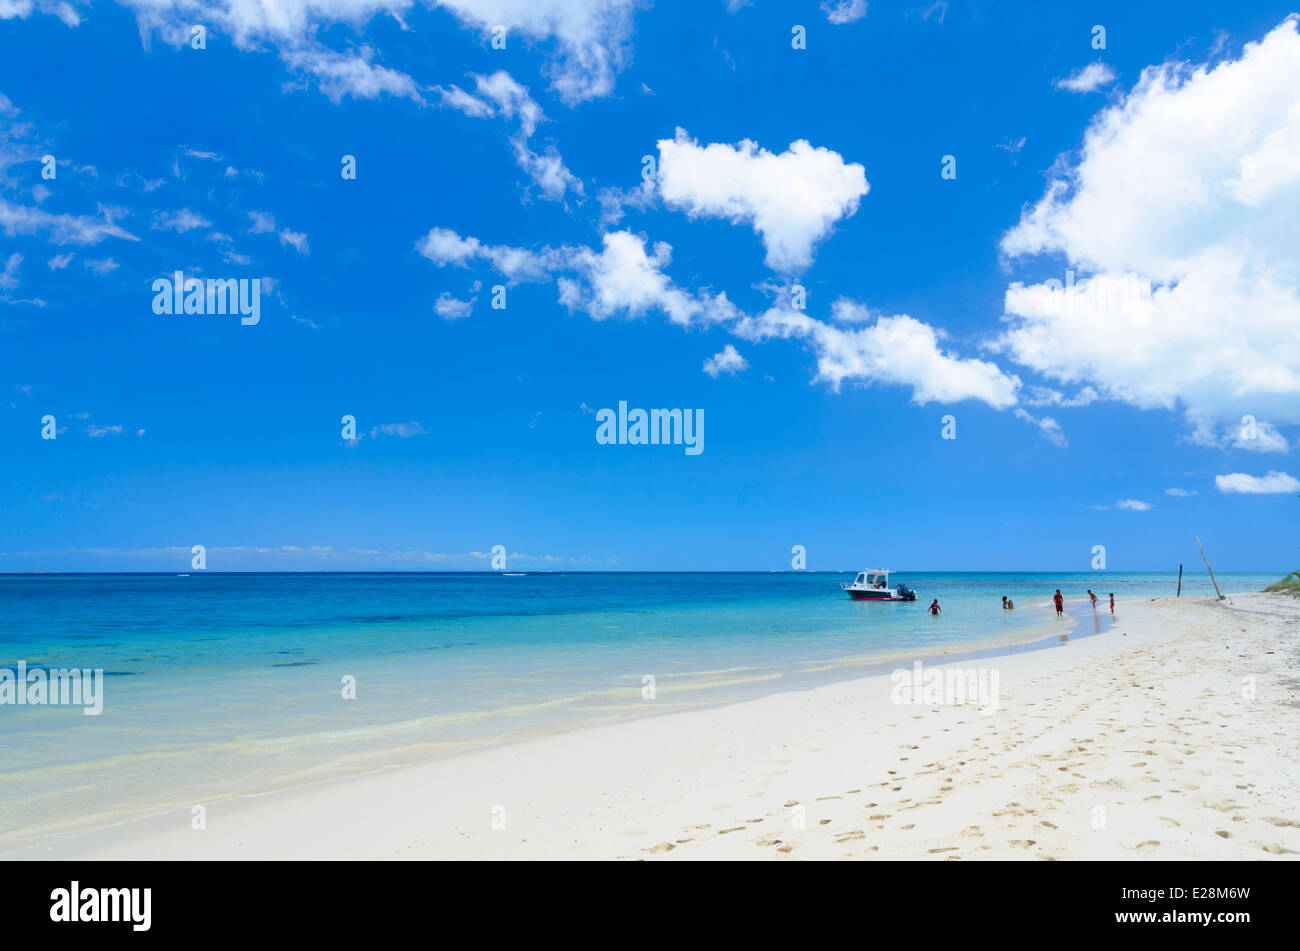 Paradise: Perfect tropical beach with blue sea / ocean and blue sky Stock Photo